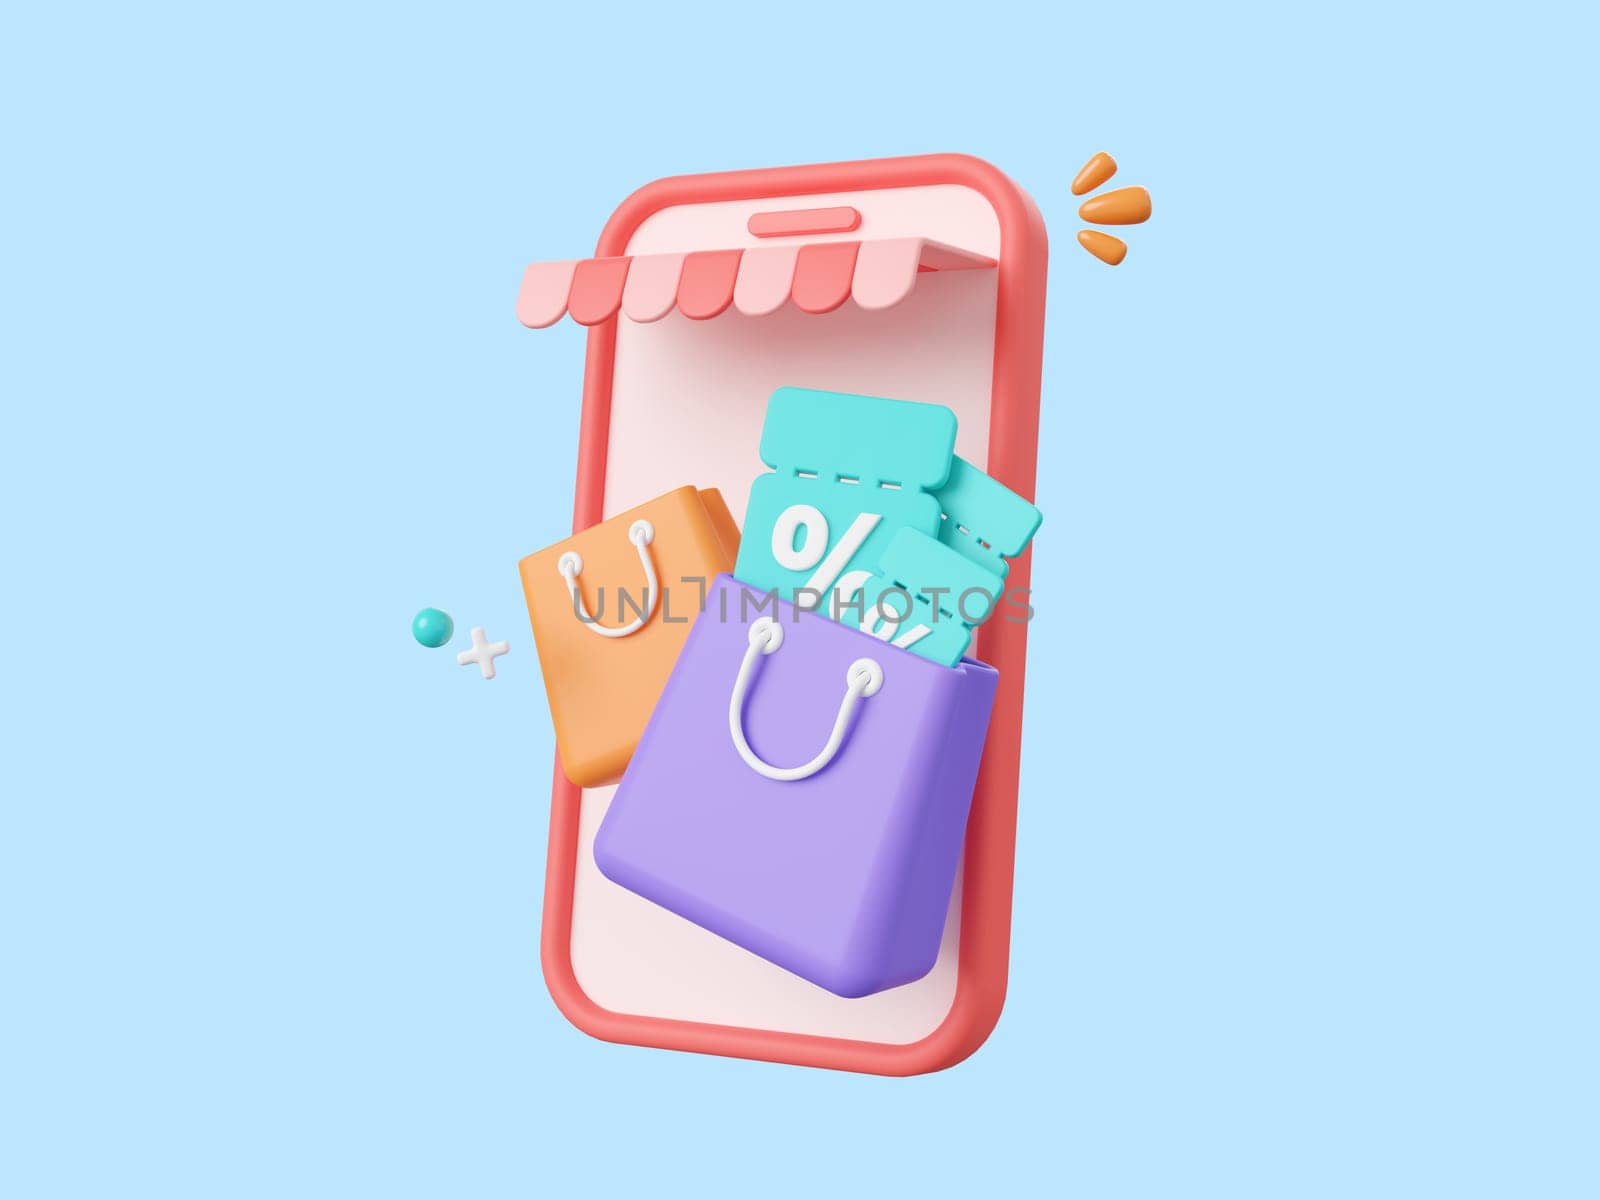 3d cartoon design illustration of Shop smartphone with discount code and shopping bag, Advertising marketing promotion concept.